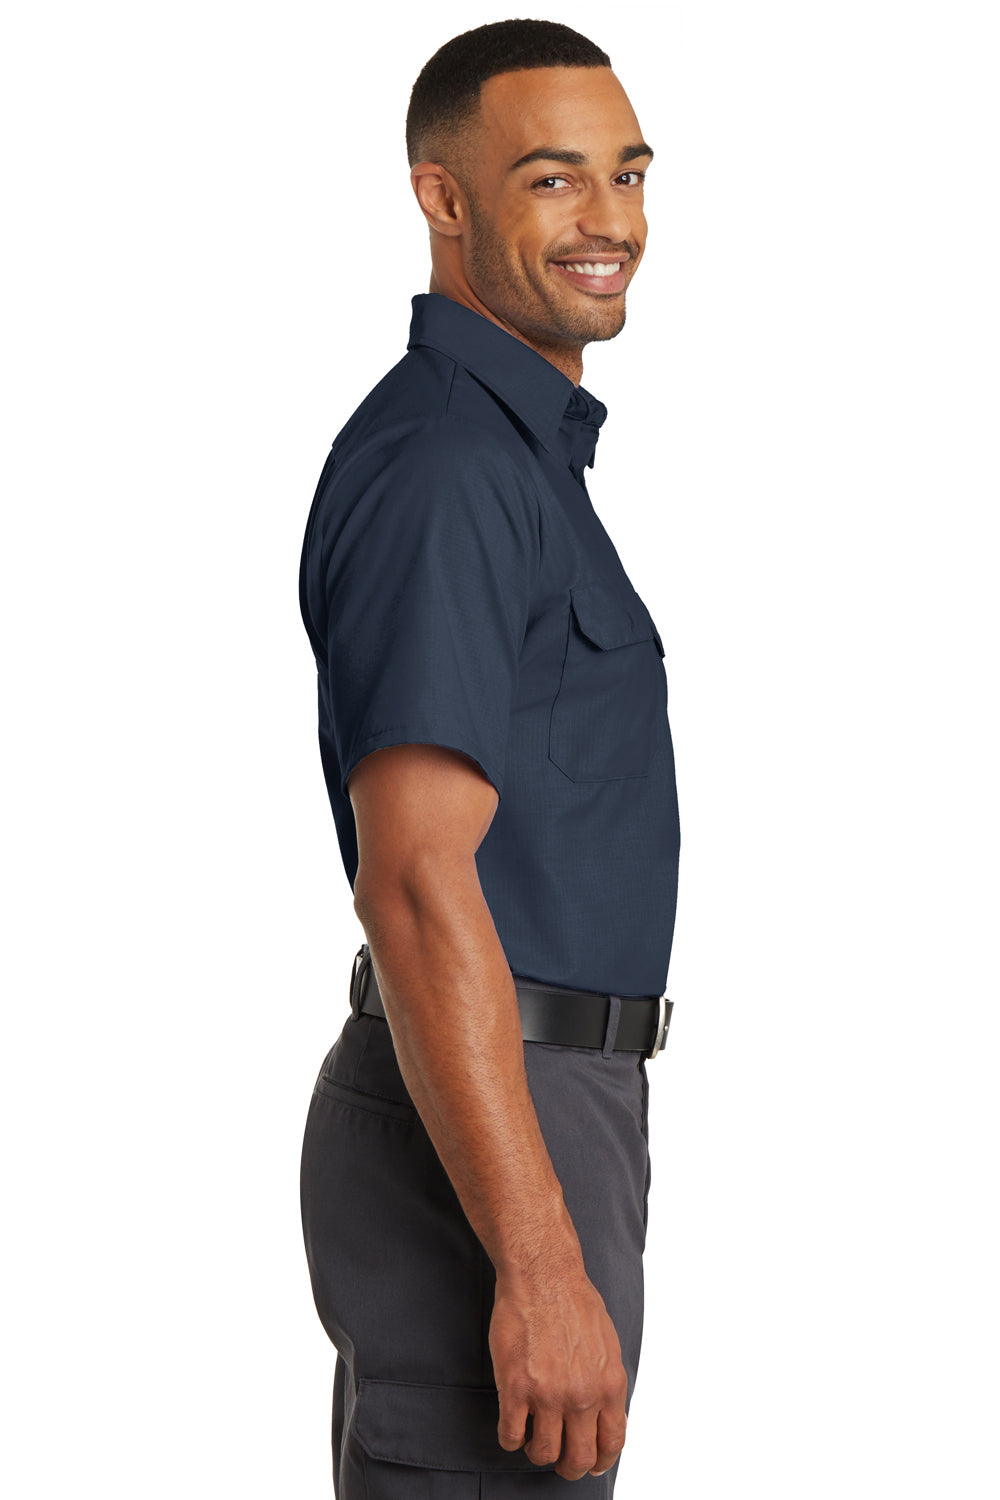 Red Kap SY60 Mens Moisture Wicking Short Sleeve Button Down Shirt w/ Double Pockets Navy Blue Side